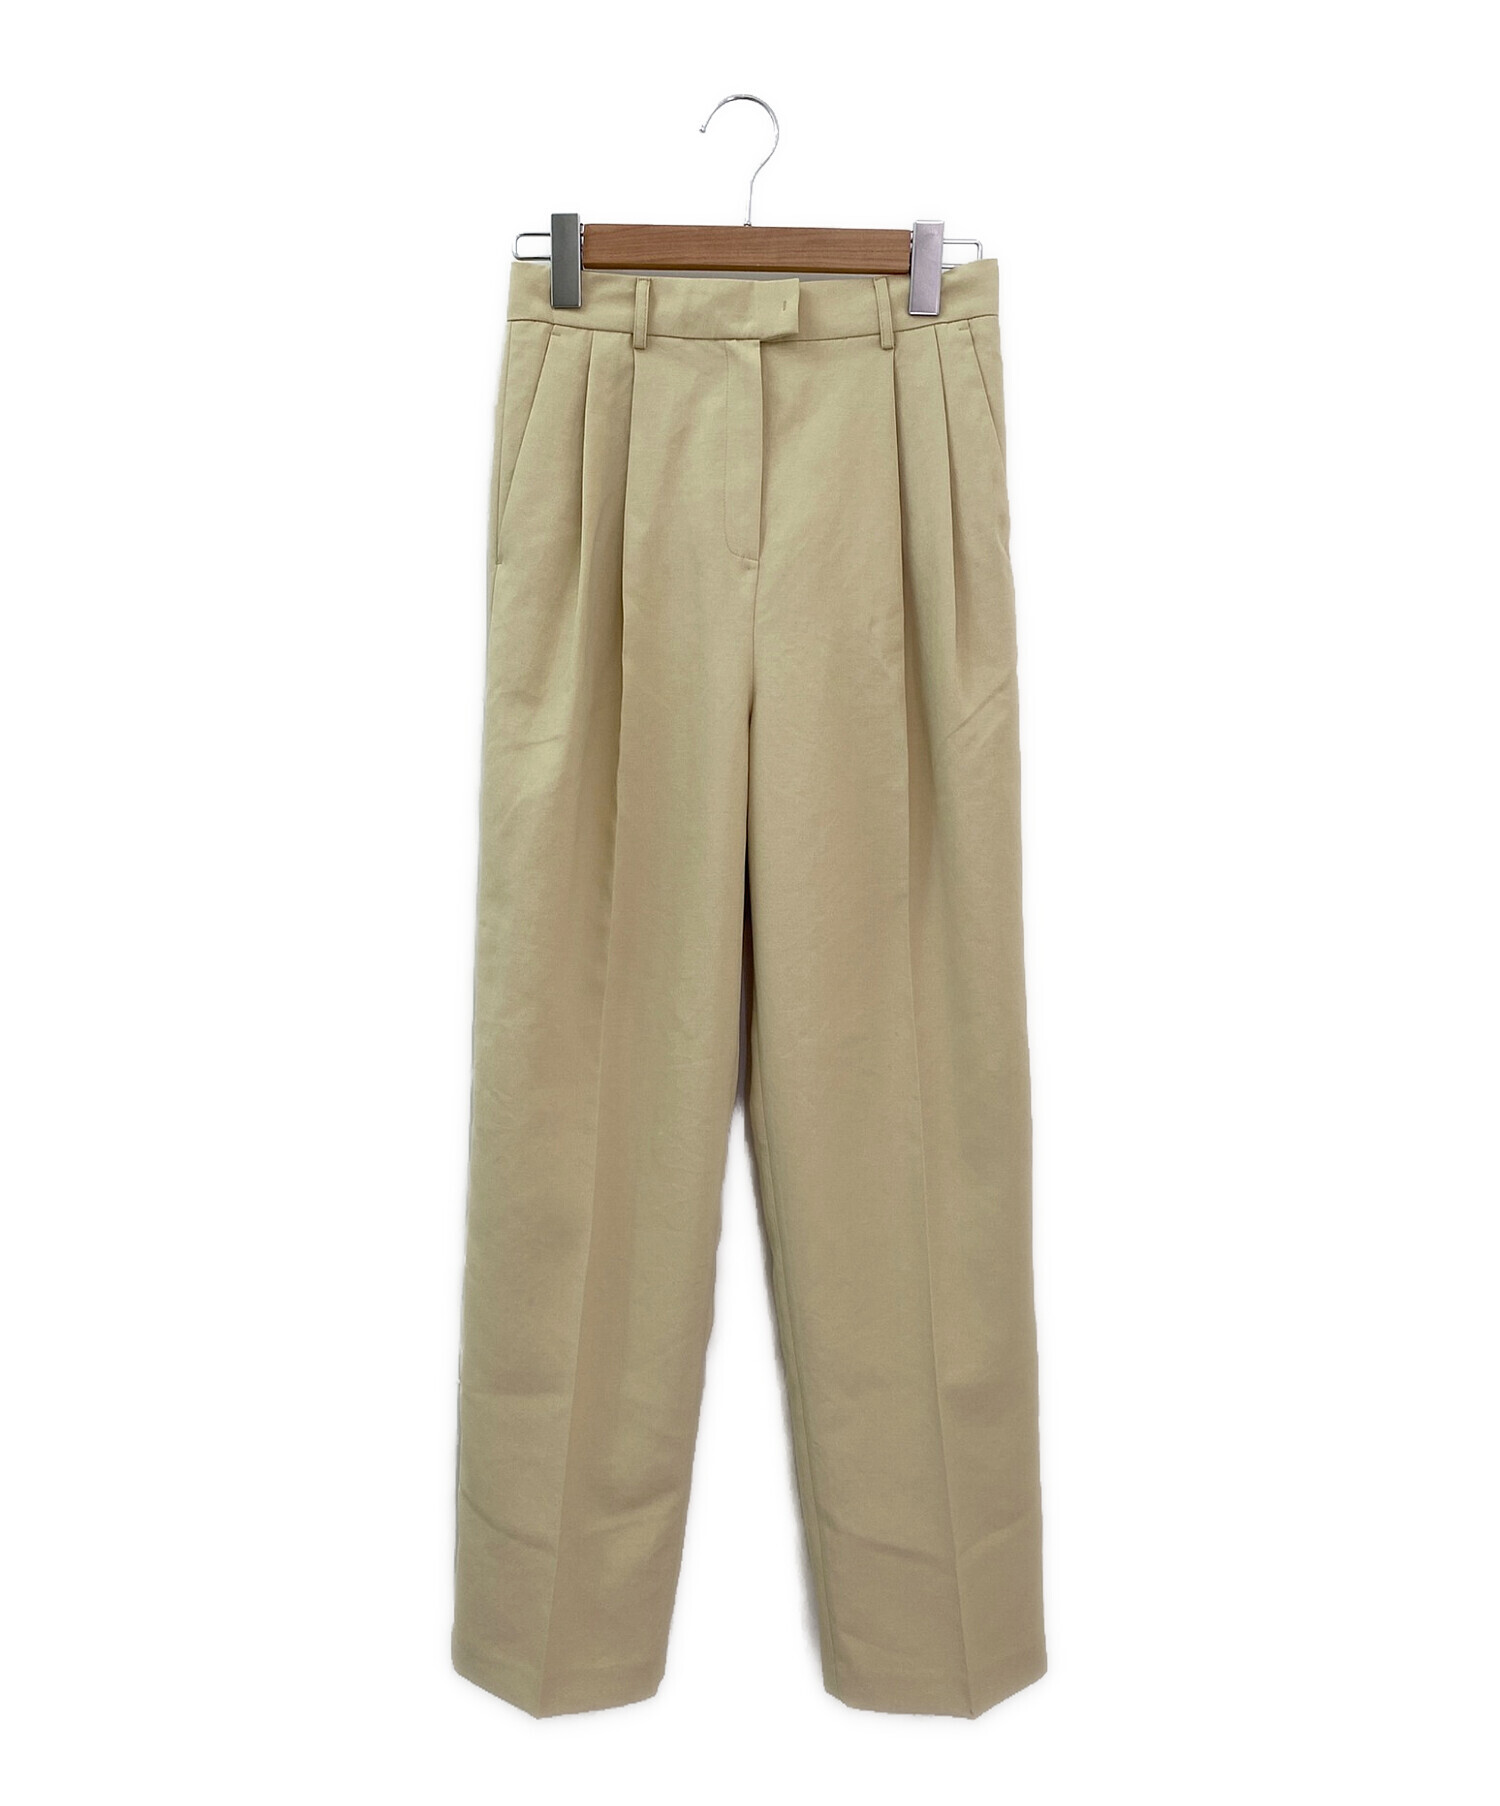 TODAYFUL Oxford Tapered Trousers 36 - カジュアルパンツ